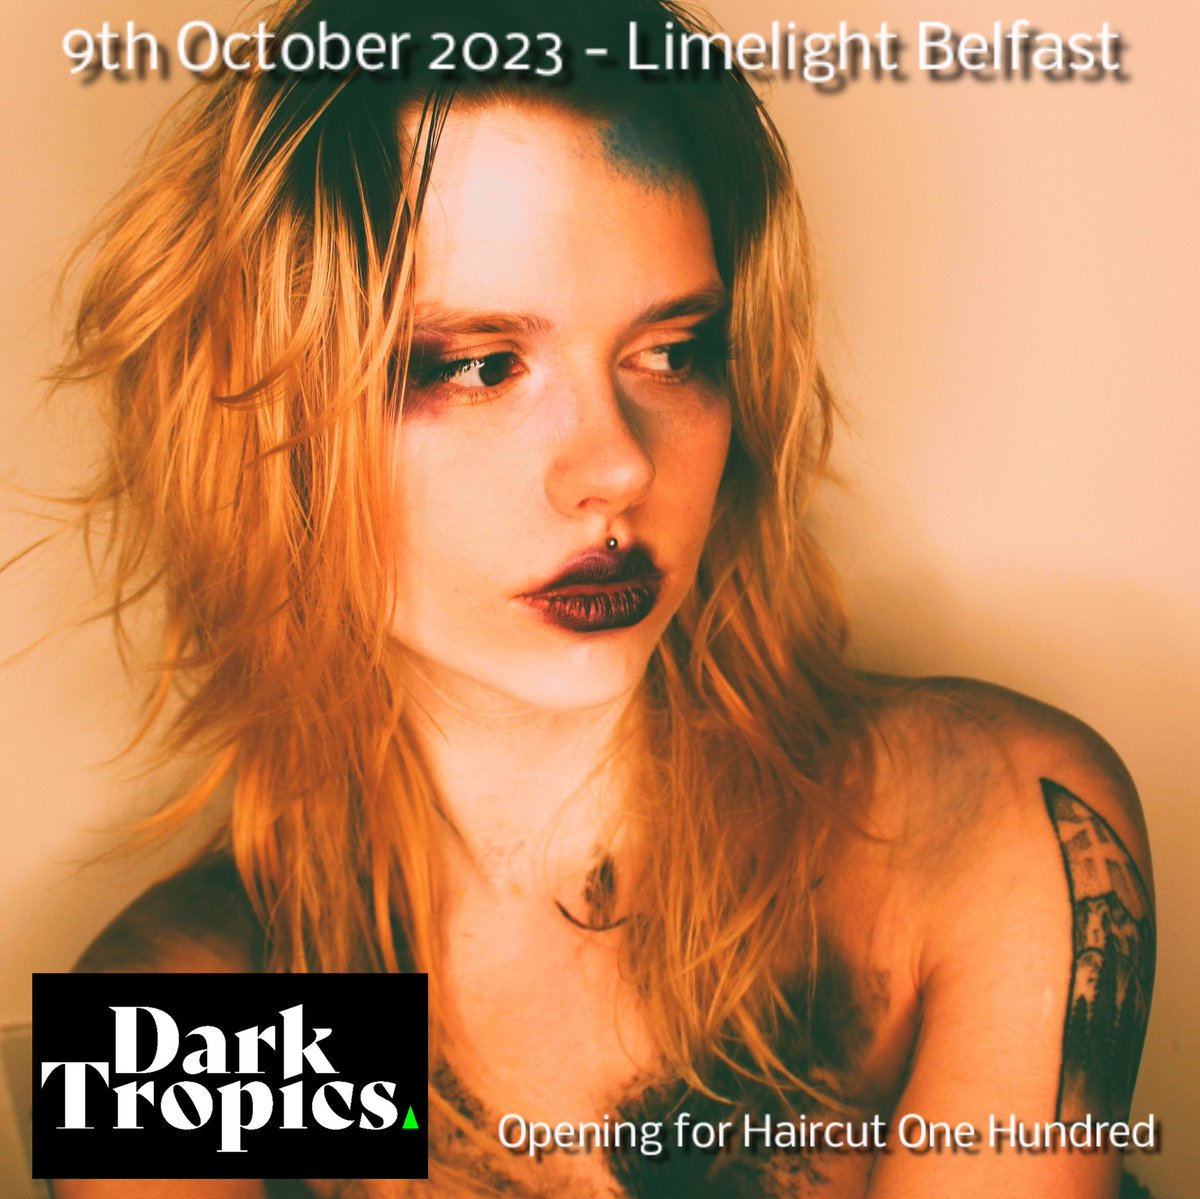 ****GIG NEWS****

Incredibly excited to be opening for @Haircut100 at the @LimelightNI on Monday 9th of October. 

Tickets available here now! 
ticketmaster.ie/haircut-100-be…

#gignews #gig #belfast #band